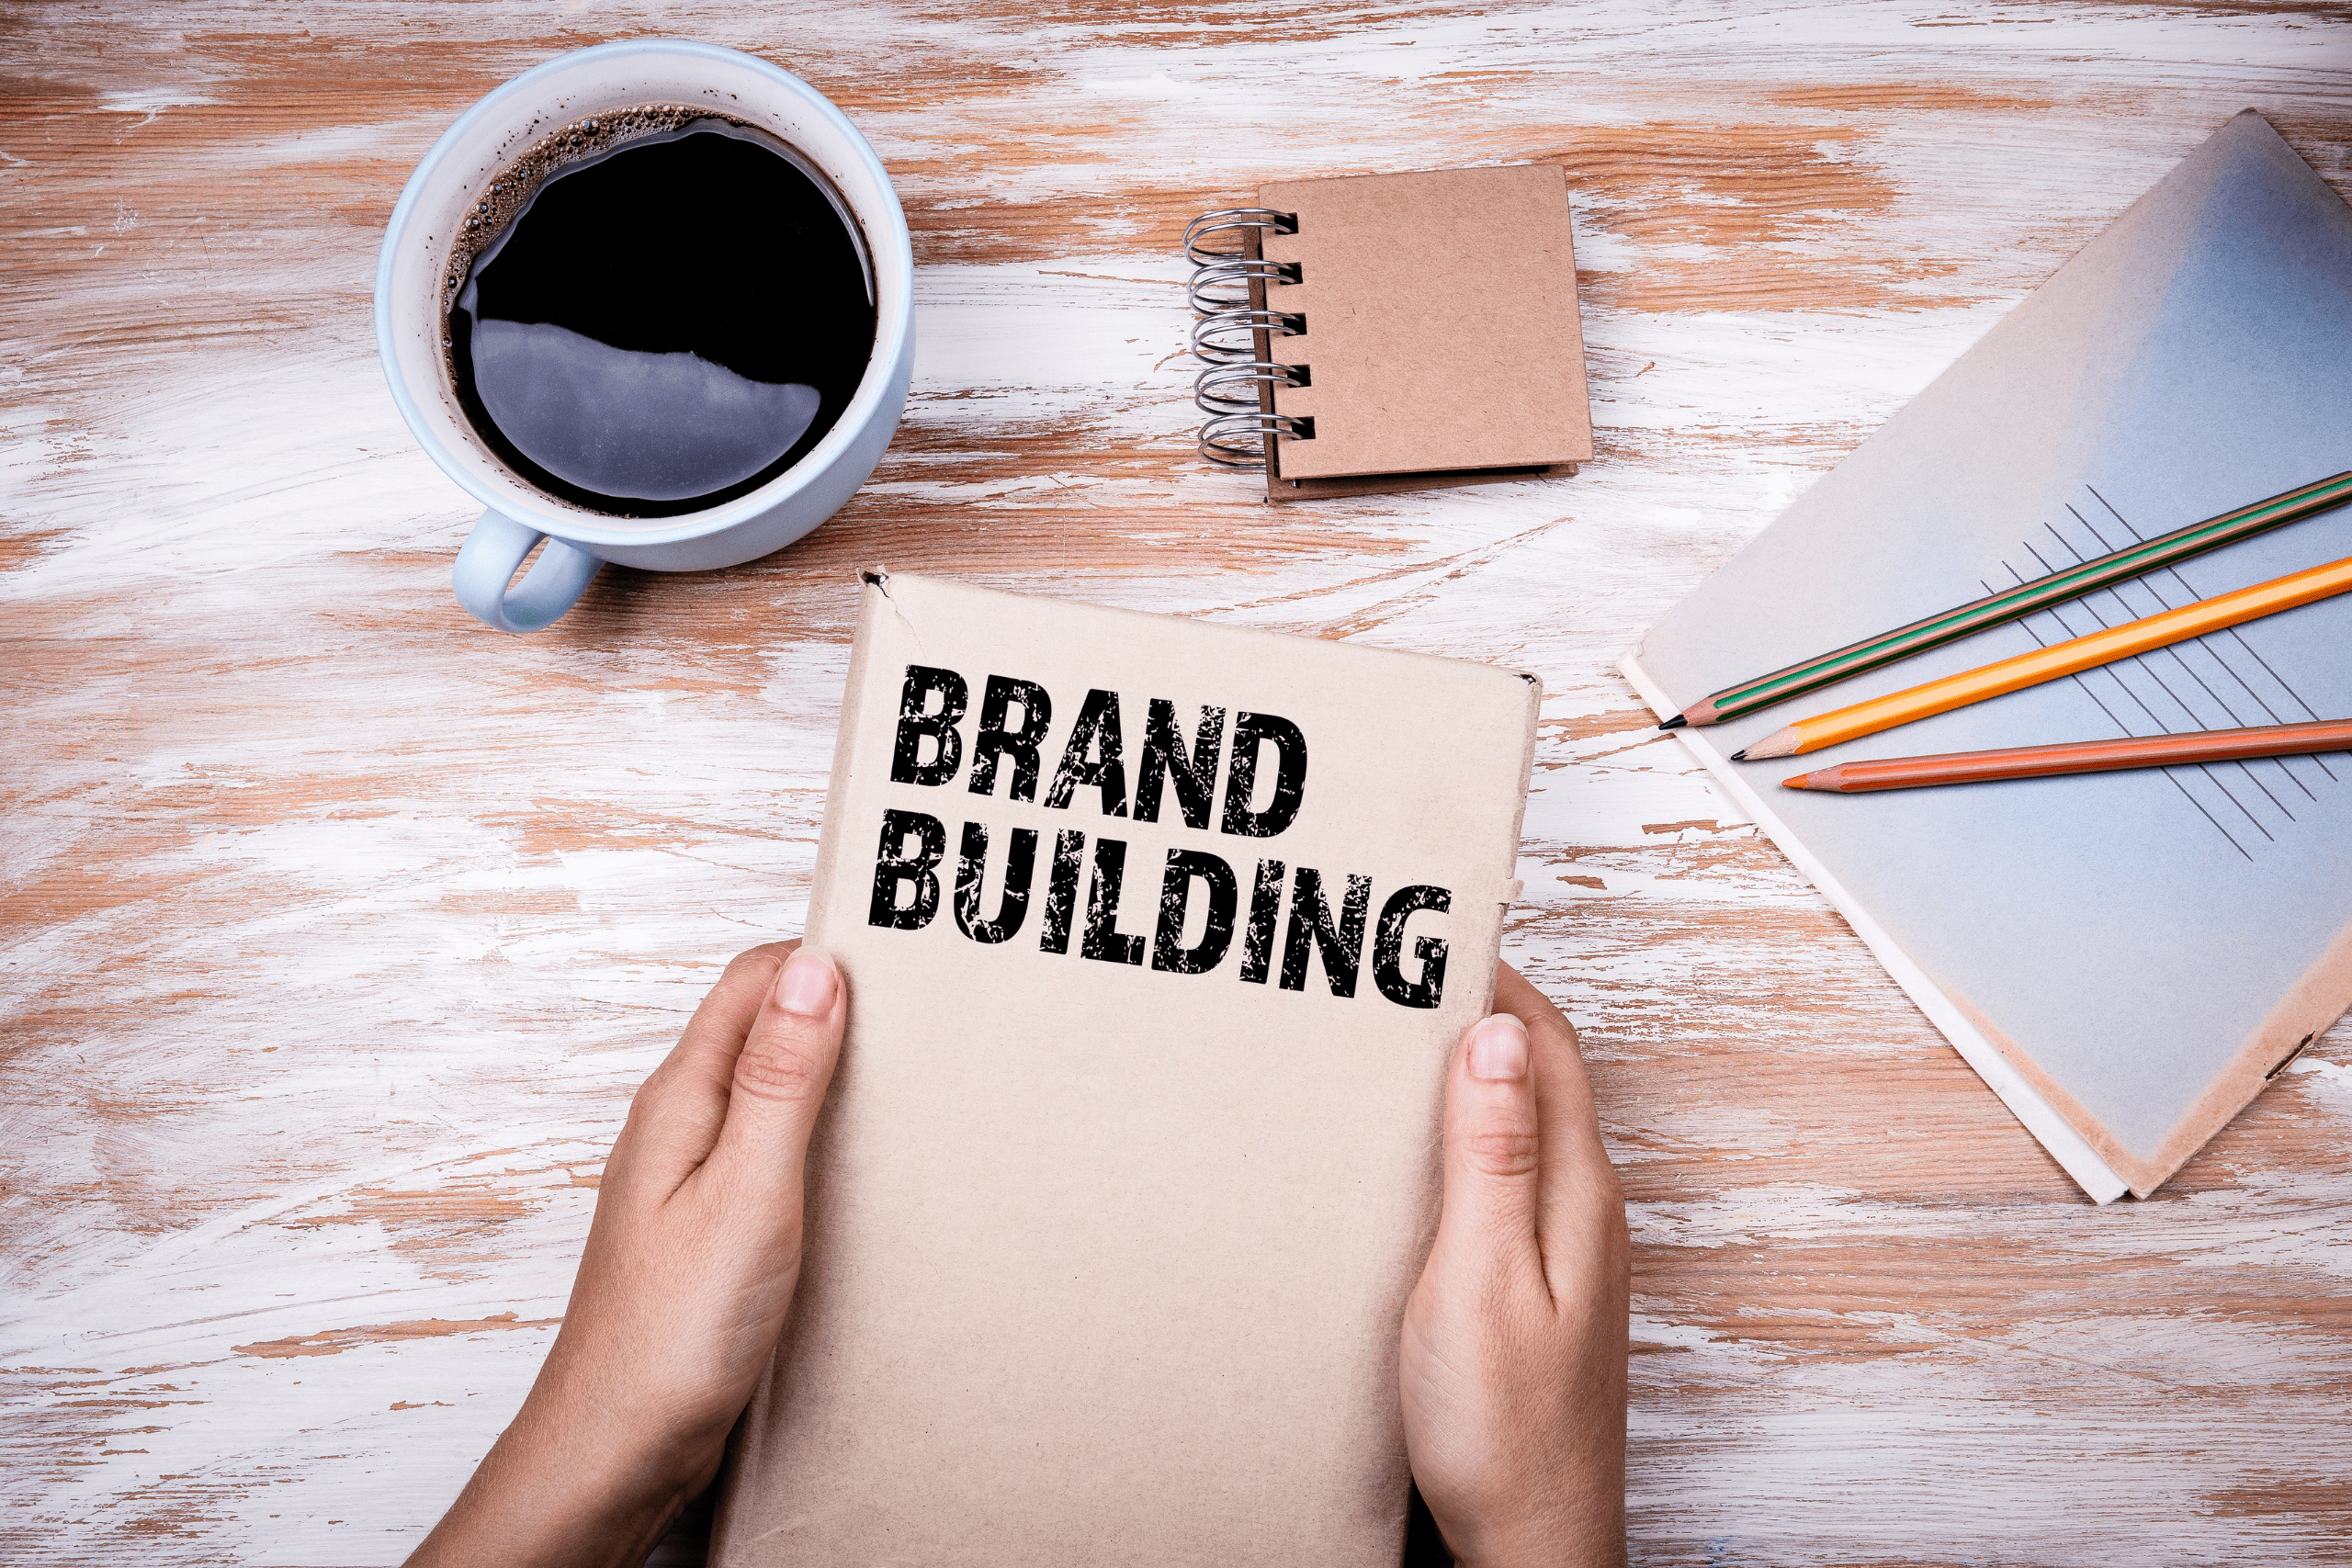 Image to depict building a brand, something our Essex marketing experts can help with